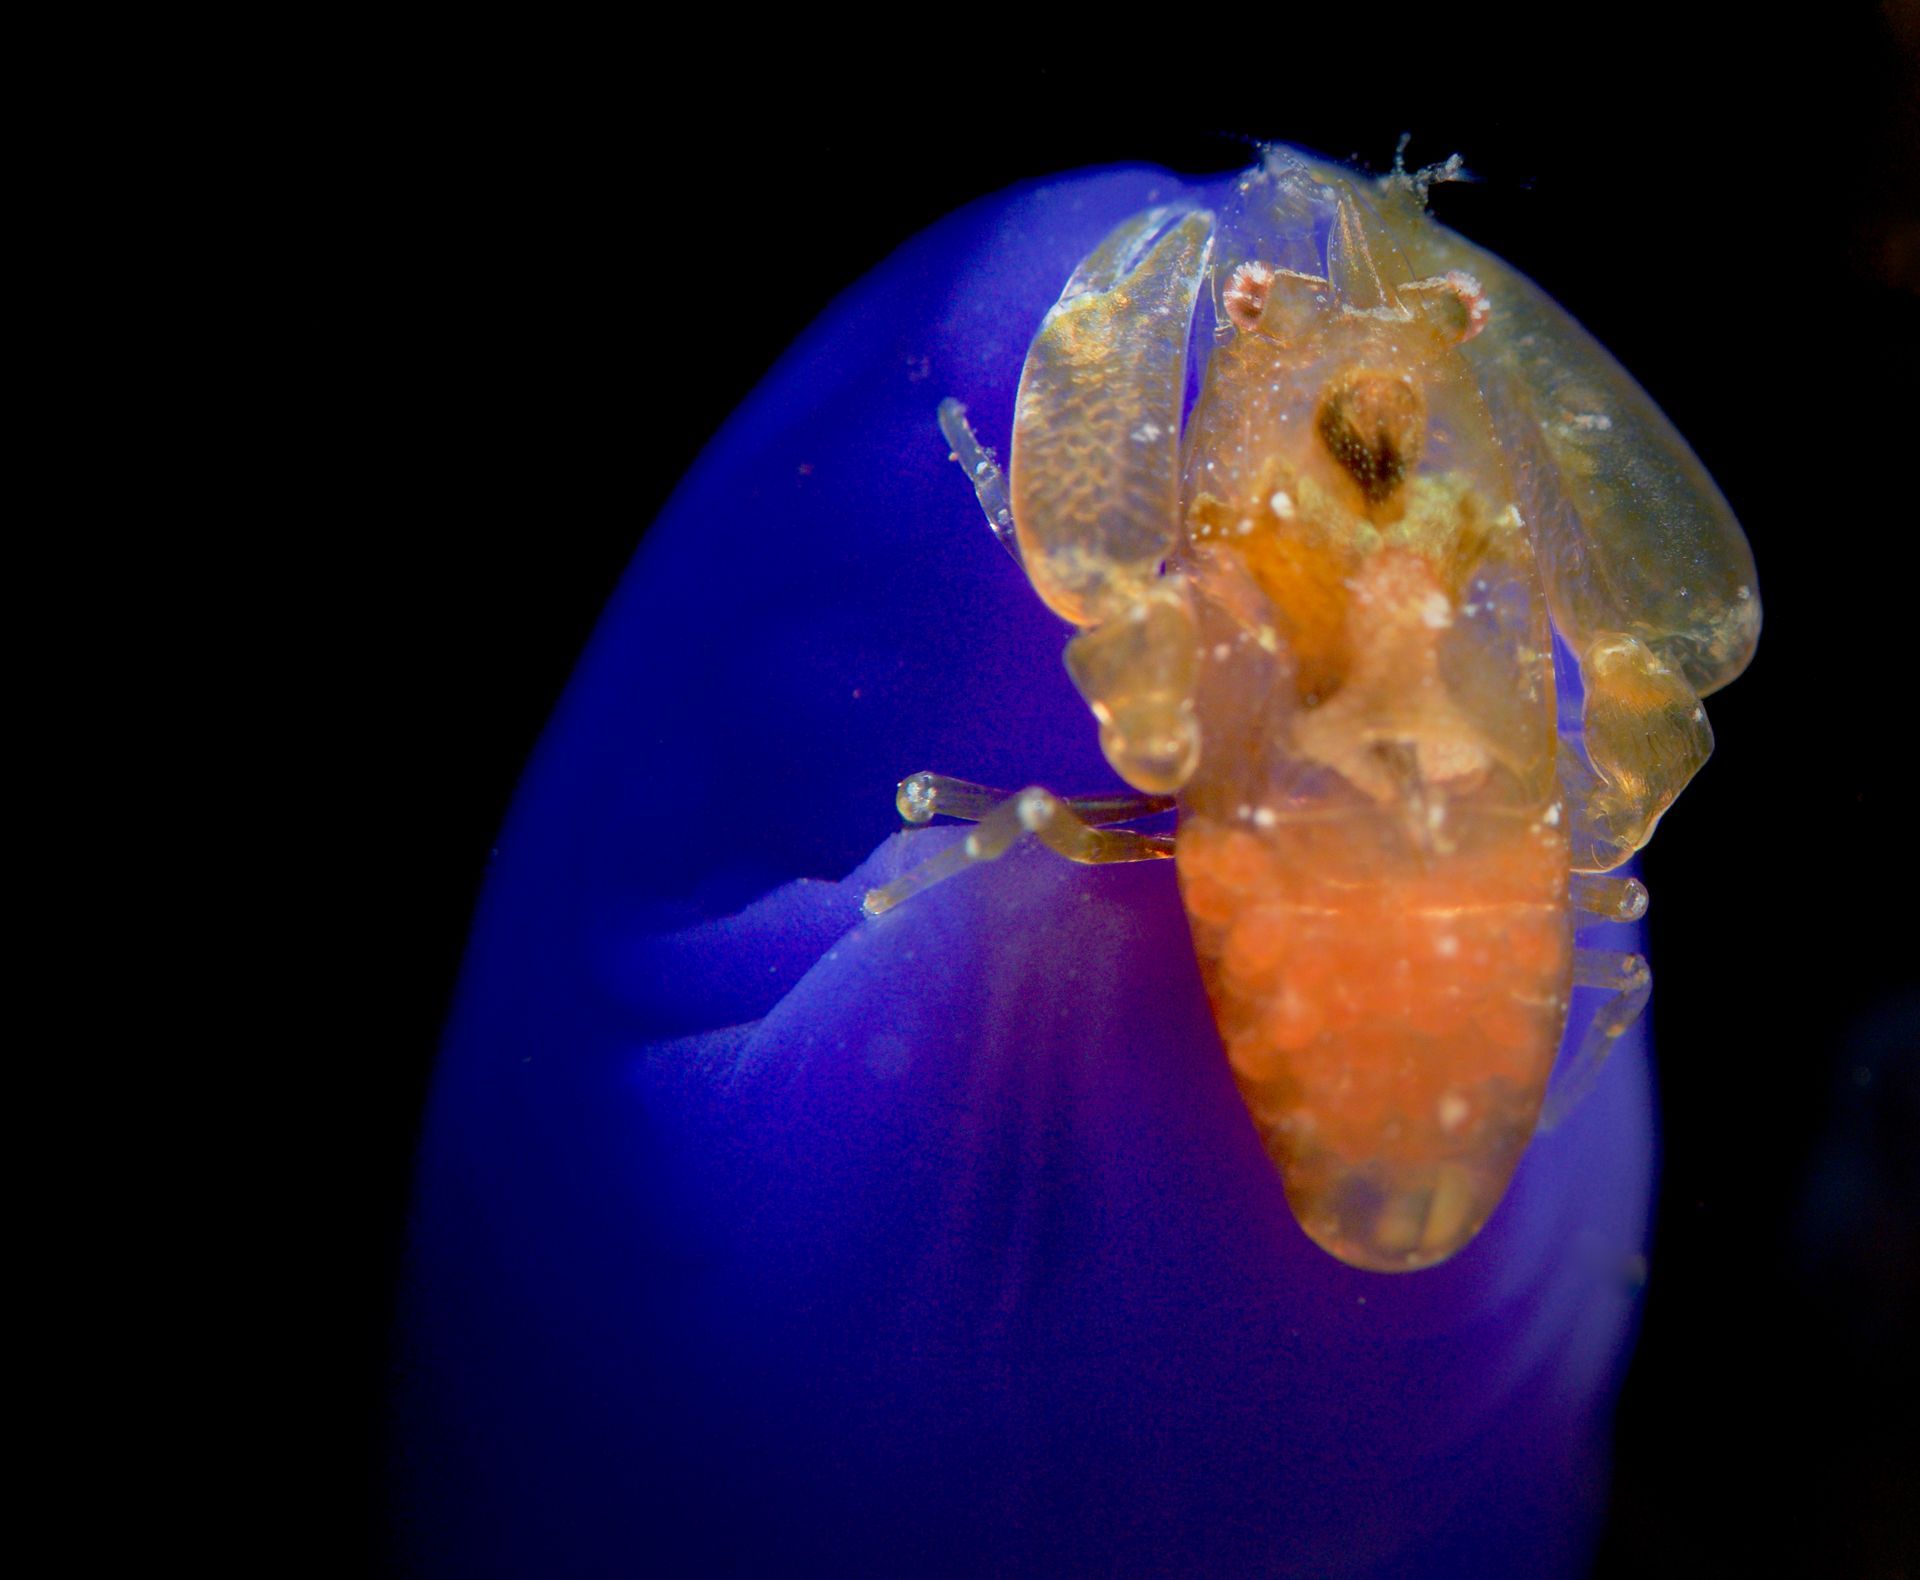 An orange shrimp sitting vertically on a blue tunicate making a compelling underwater macro  Fiji image